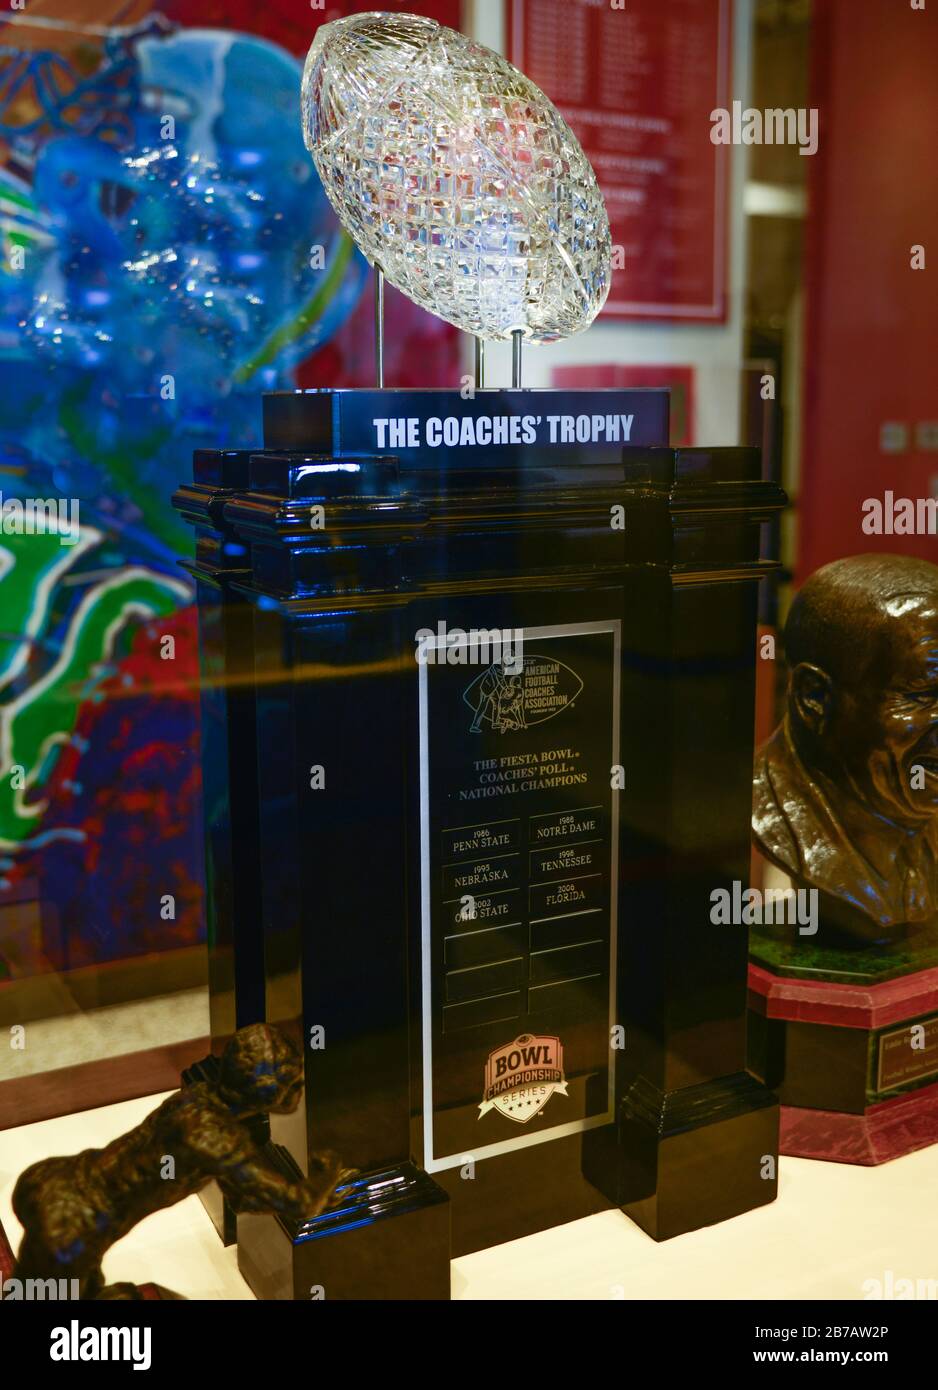 Inside a case, A crystal cut football atop the Coaches trophy for the Fiesta Bowl Coaches National Championship, at Zigler's Museum, Scottsdale, AZ Stock Photo